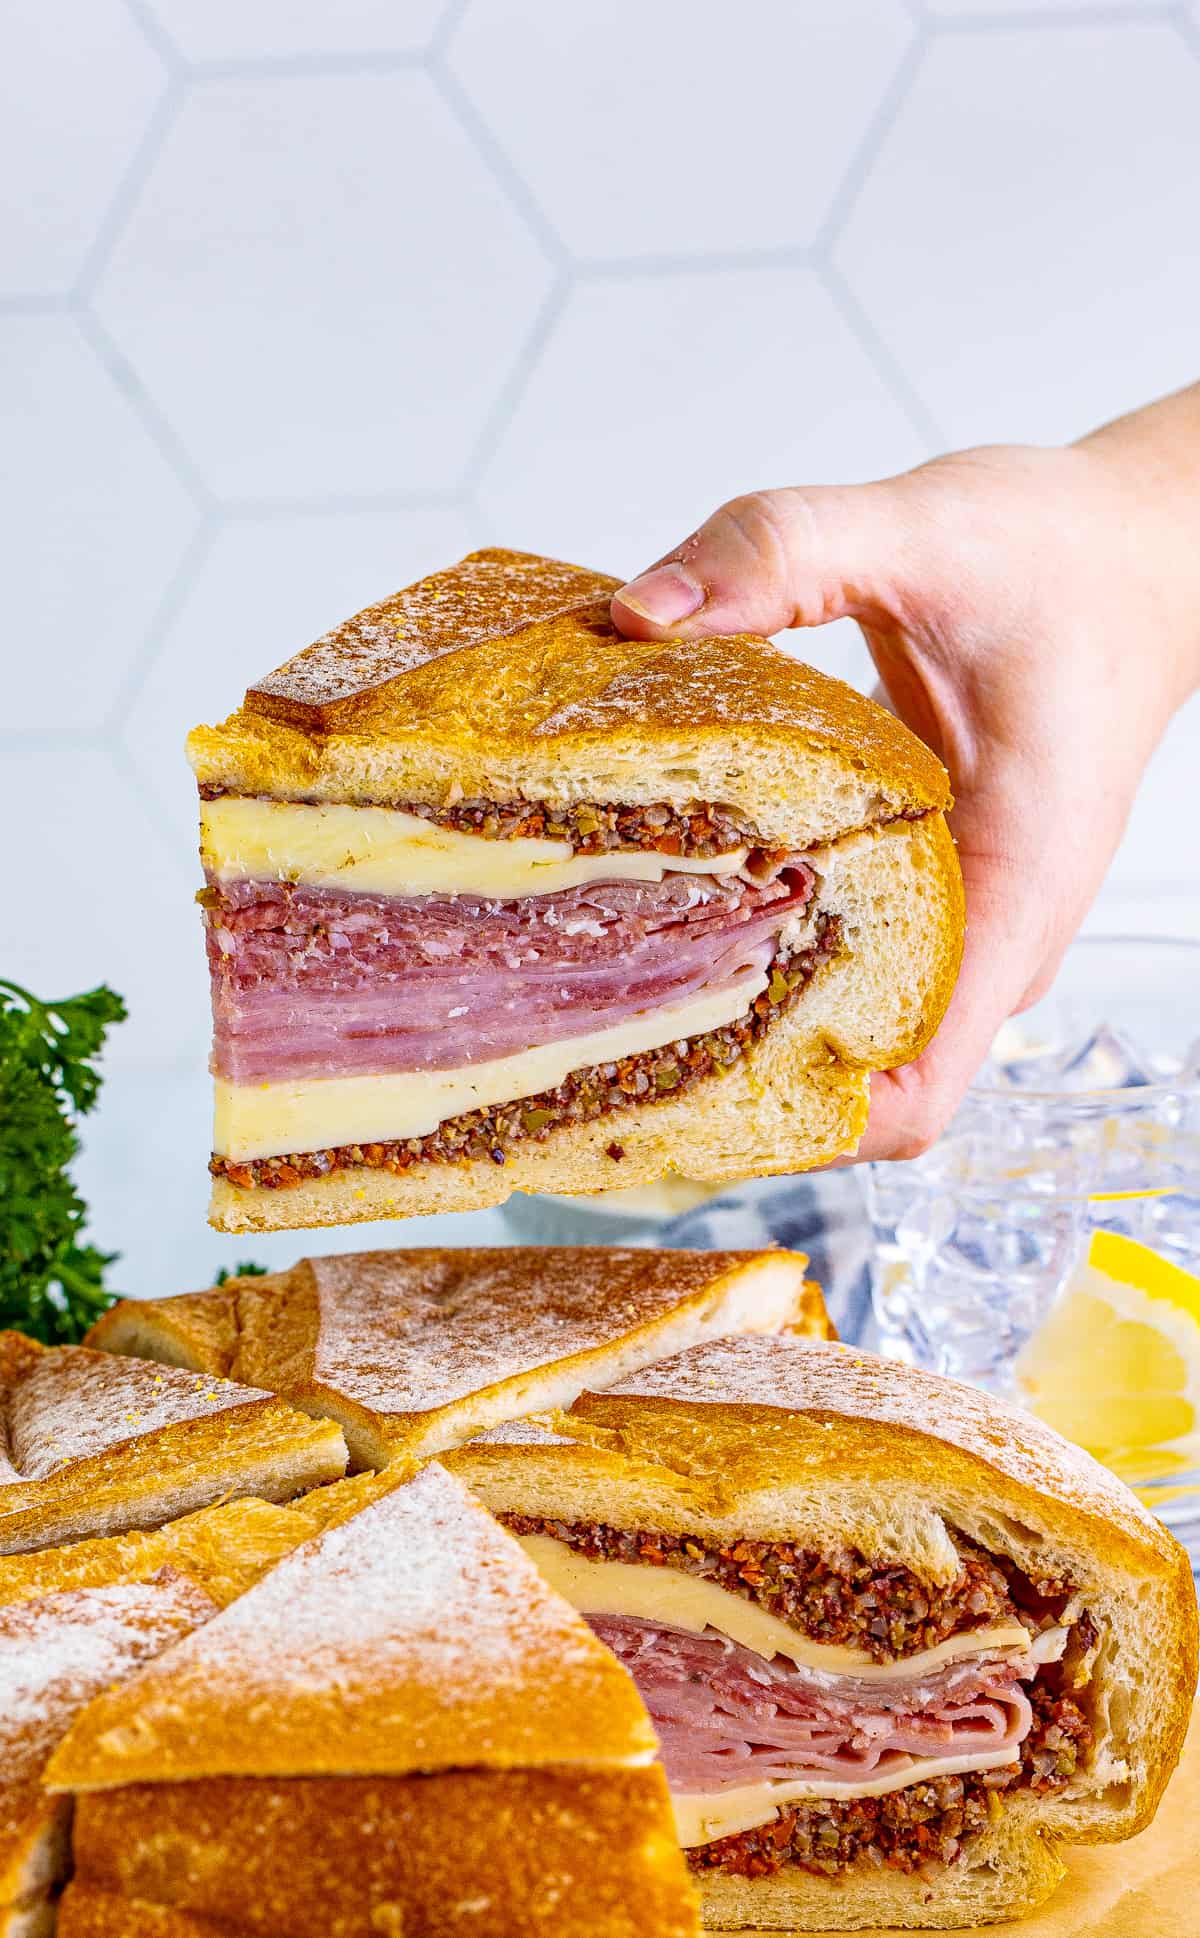 Hand holding up one wedge of the sandwich showing the layers inside.